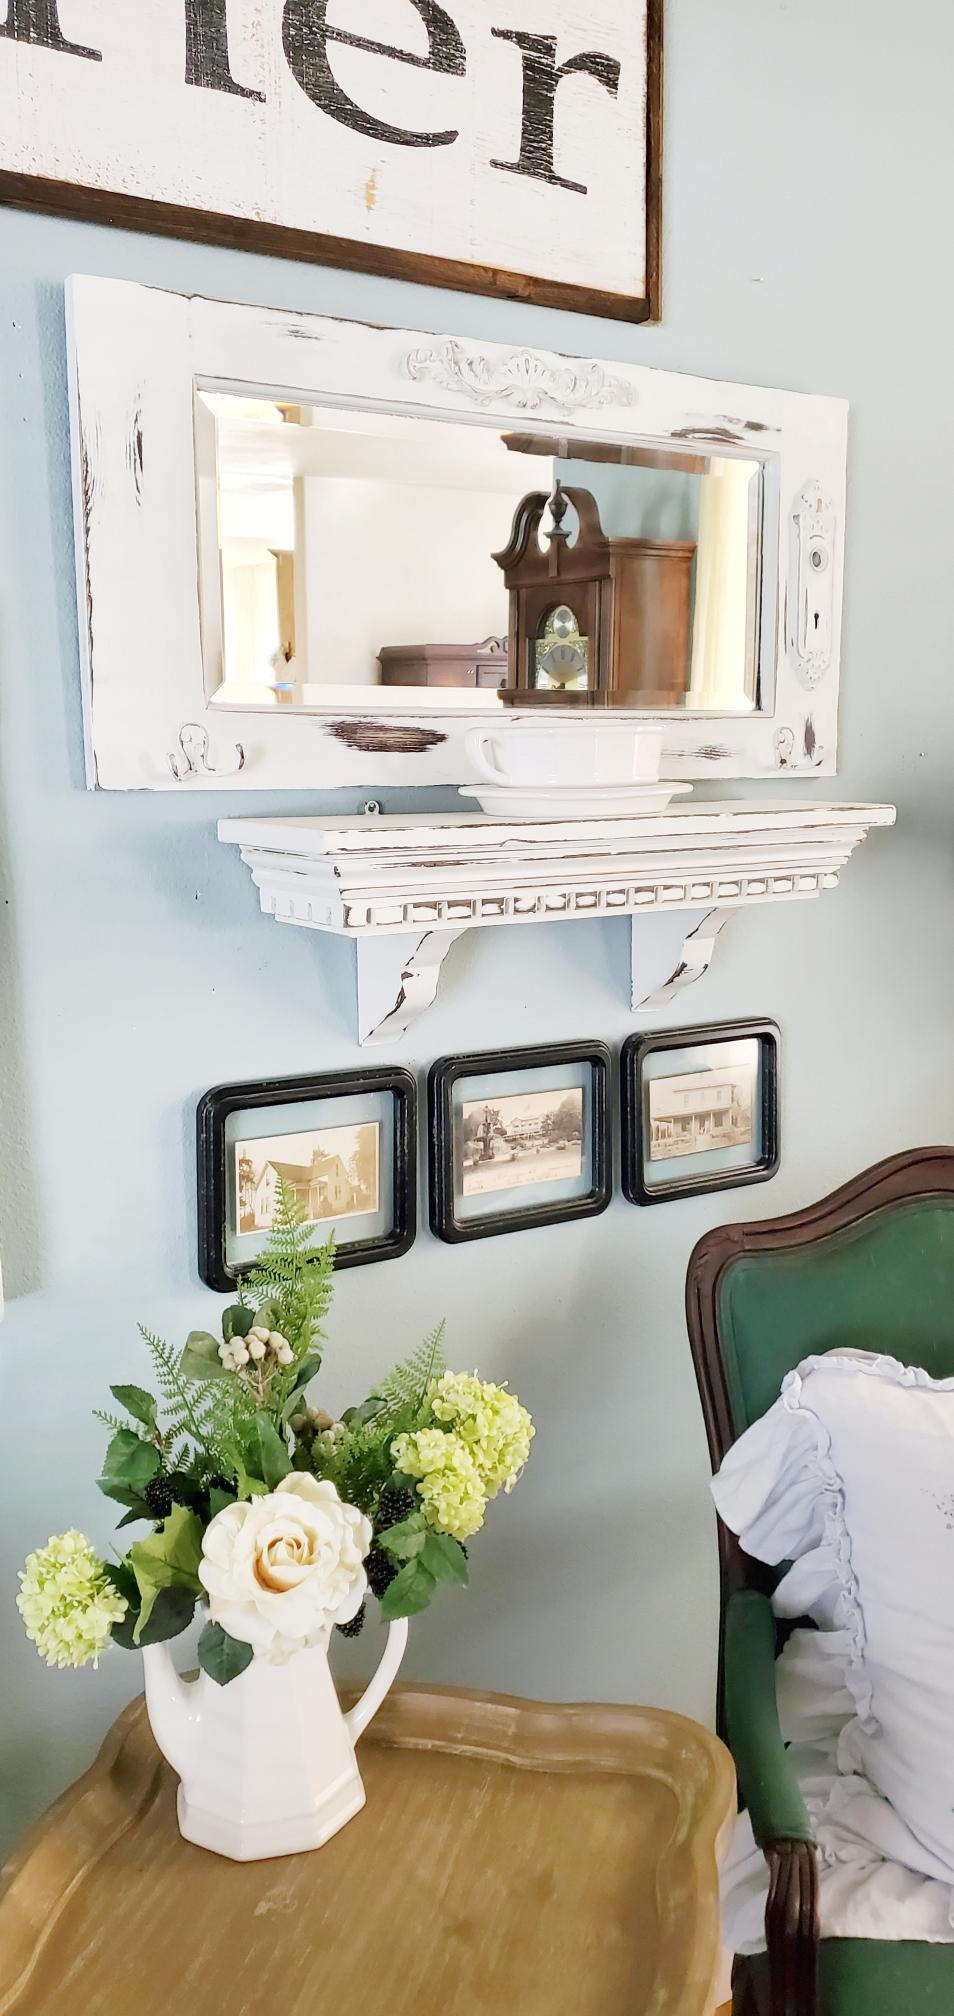 The after photo of the Goodwill shelf & mirror makeover.